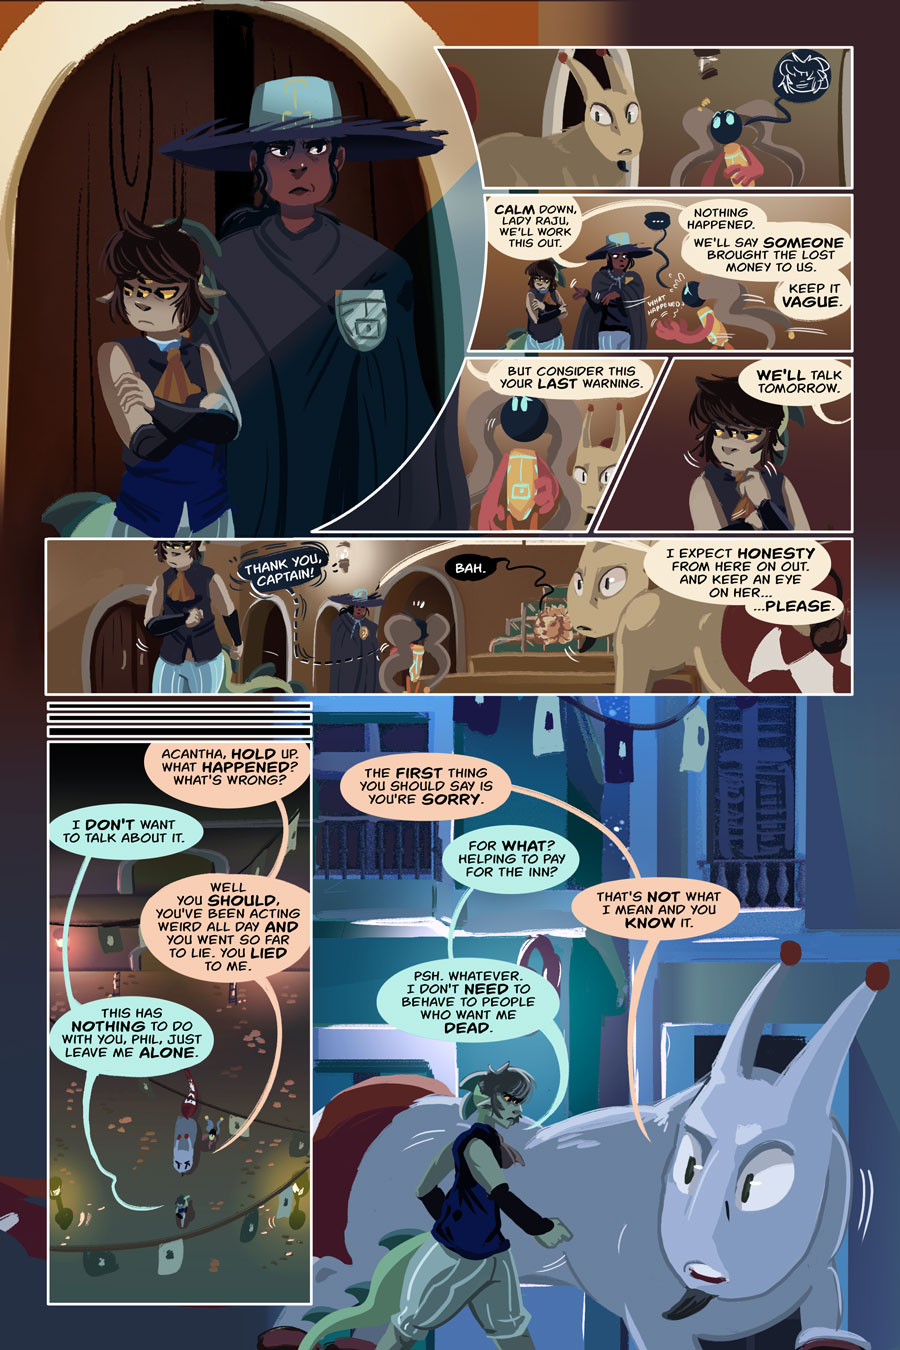 Chapter 8, page 42